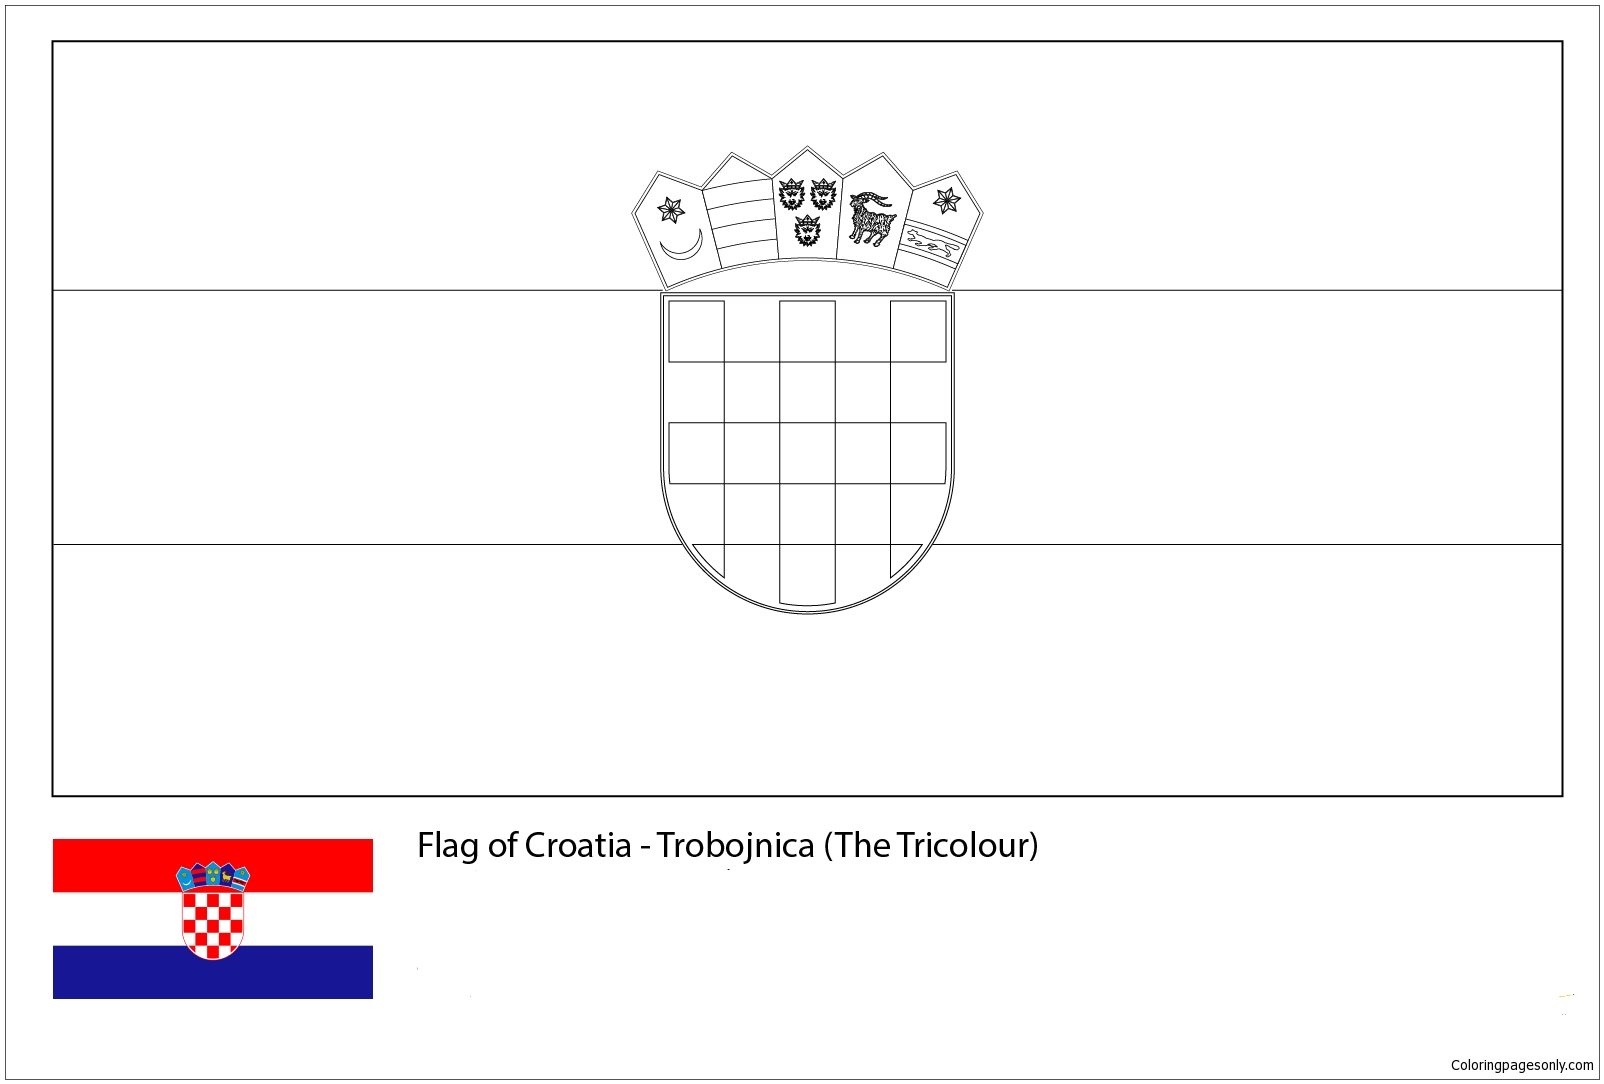 Flag of Croatia-World Cup 2018 from World Cup